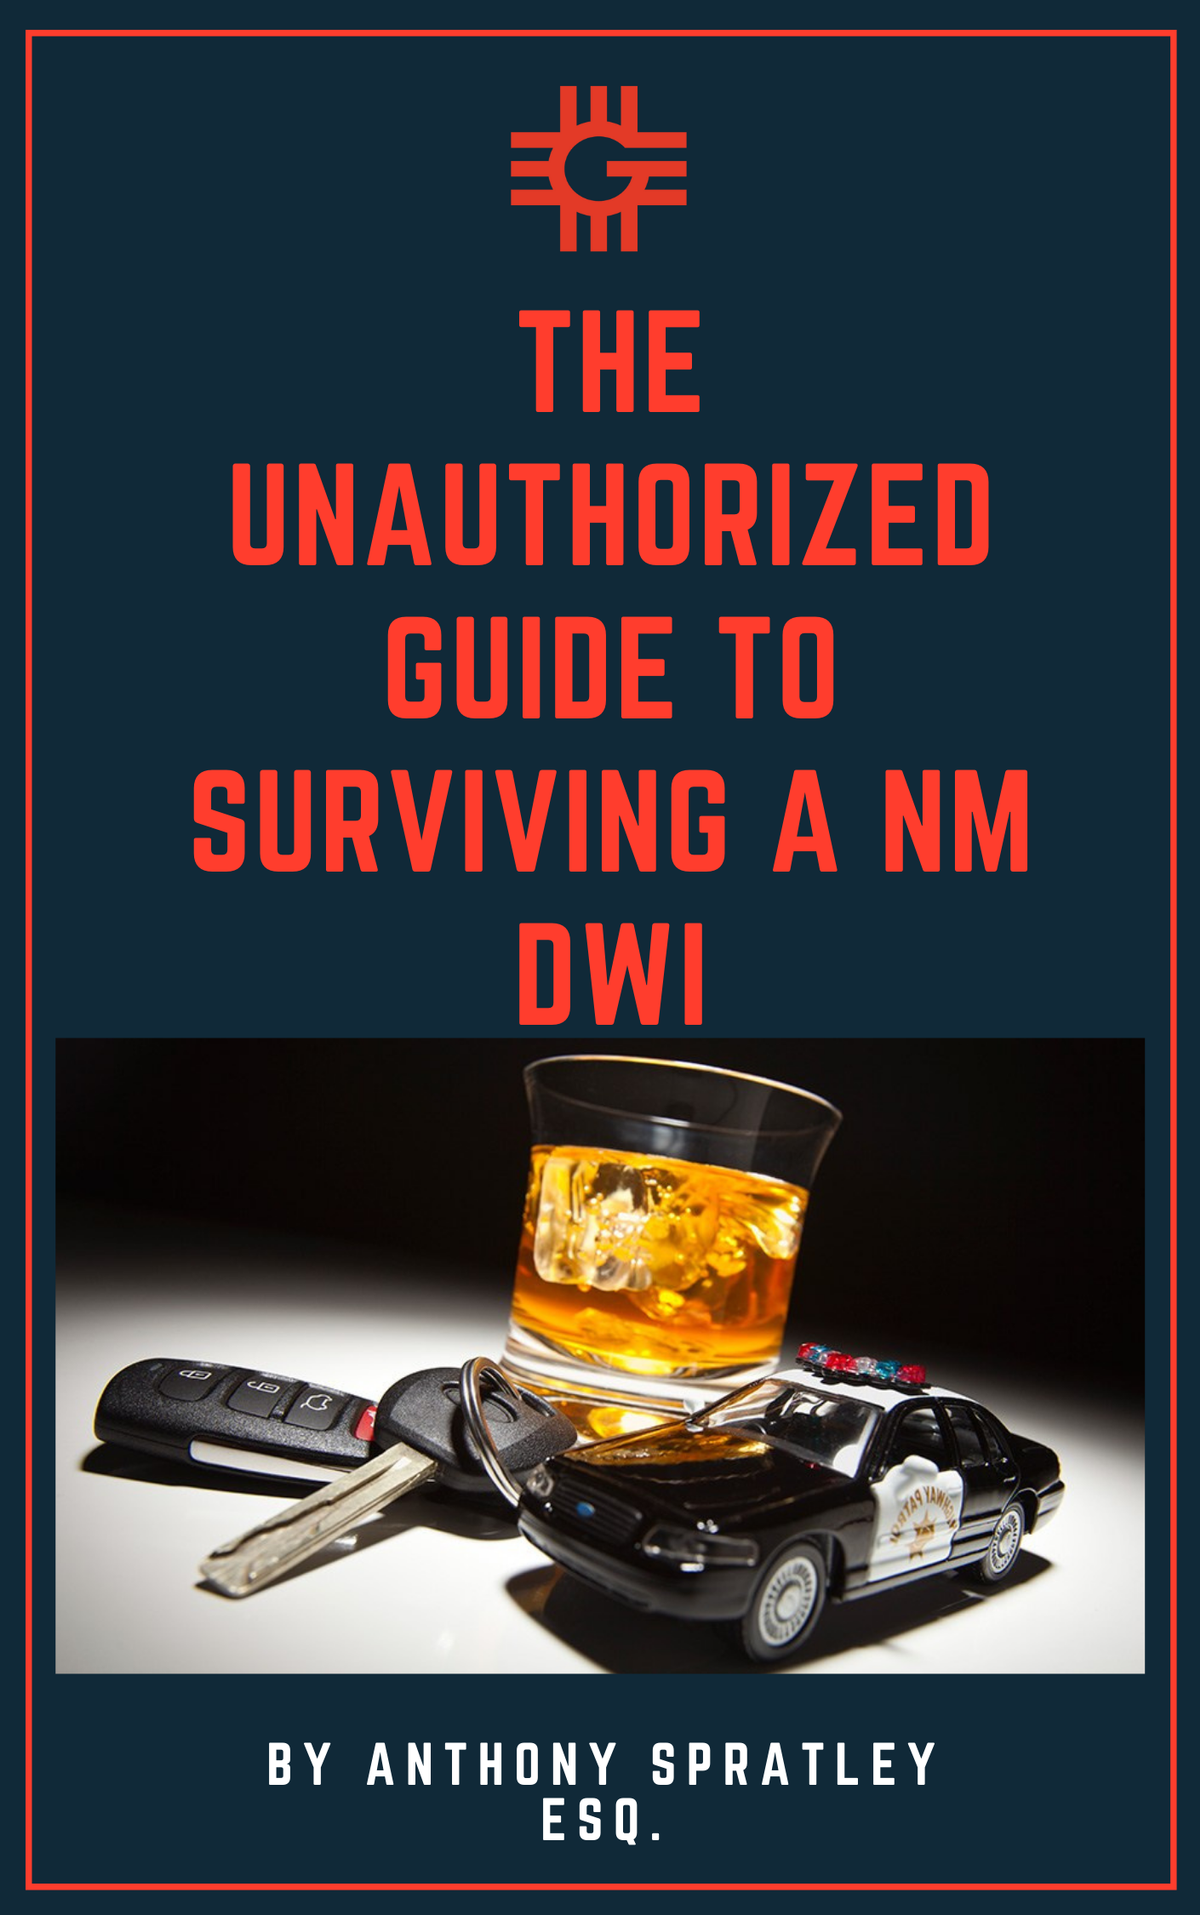 Guide To Surviving A NM DWI.